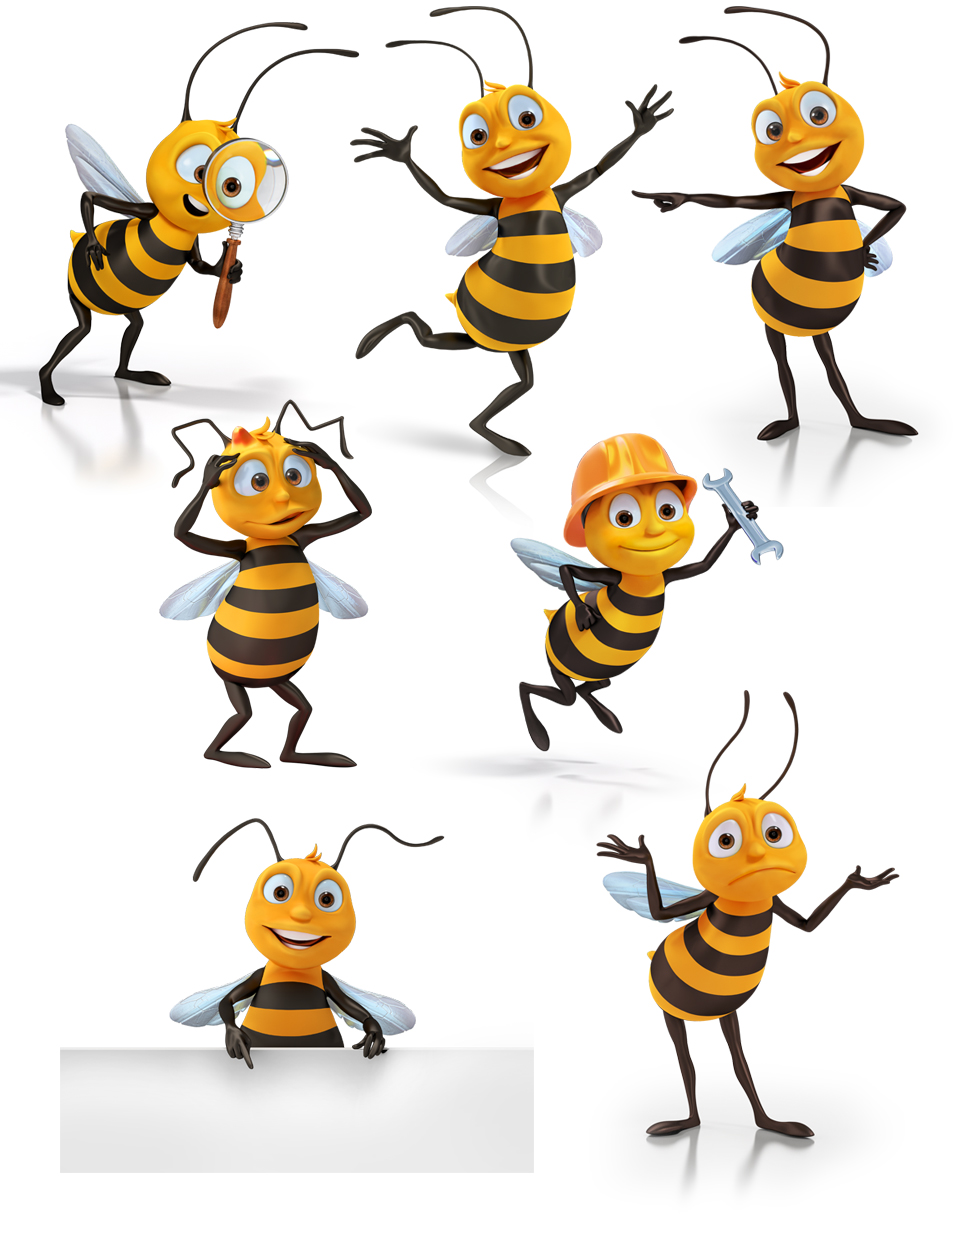 Bees | Character Mill | Character design, illustration and animation